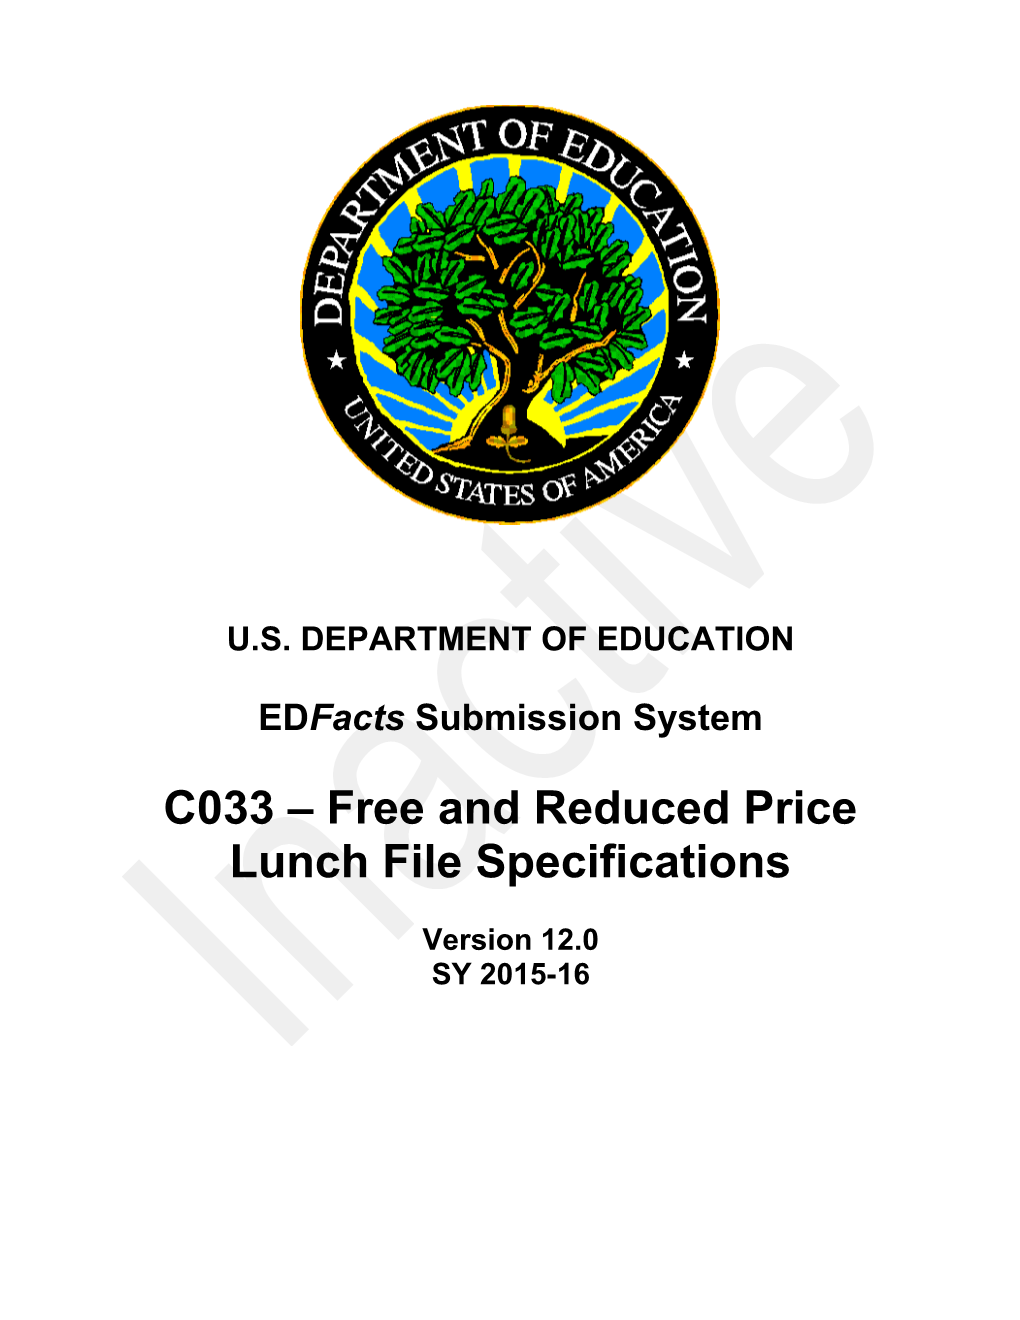 Free Reduced Price Lunch File Specifications